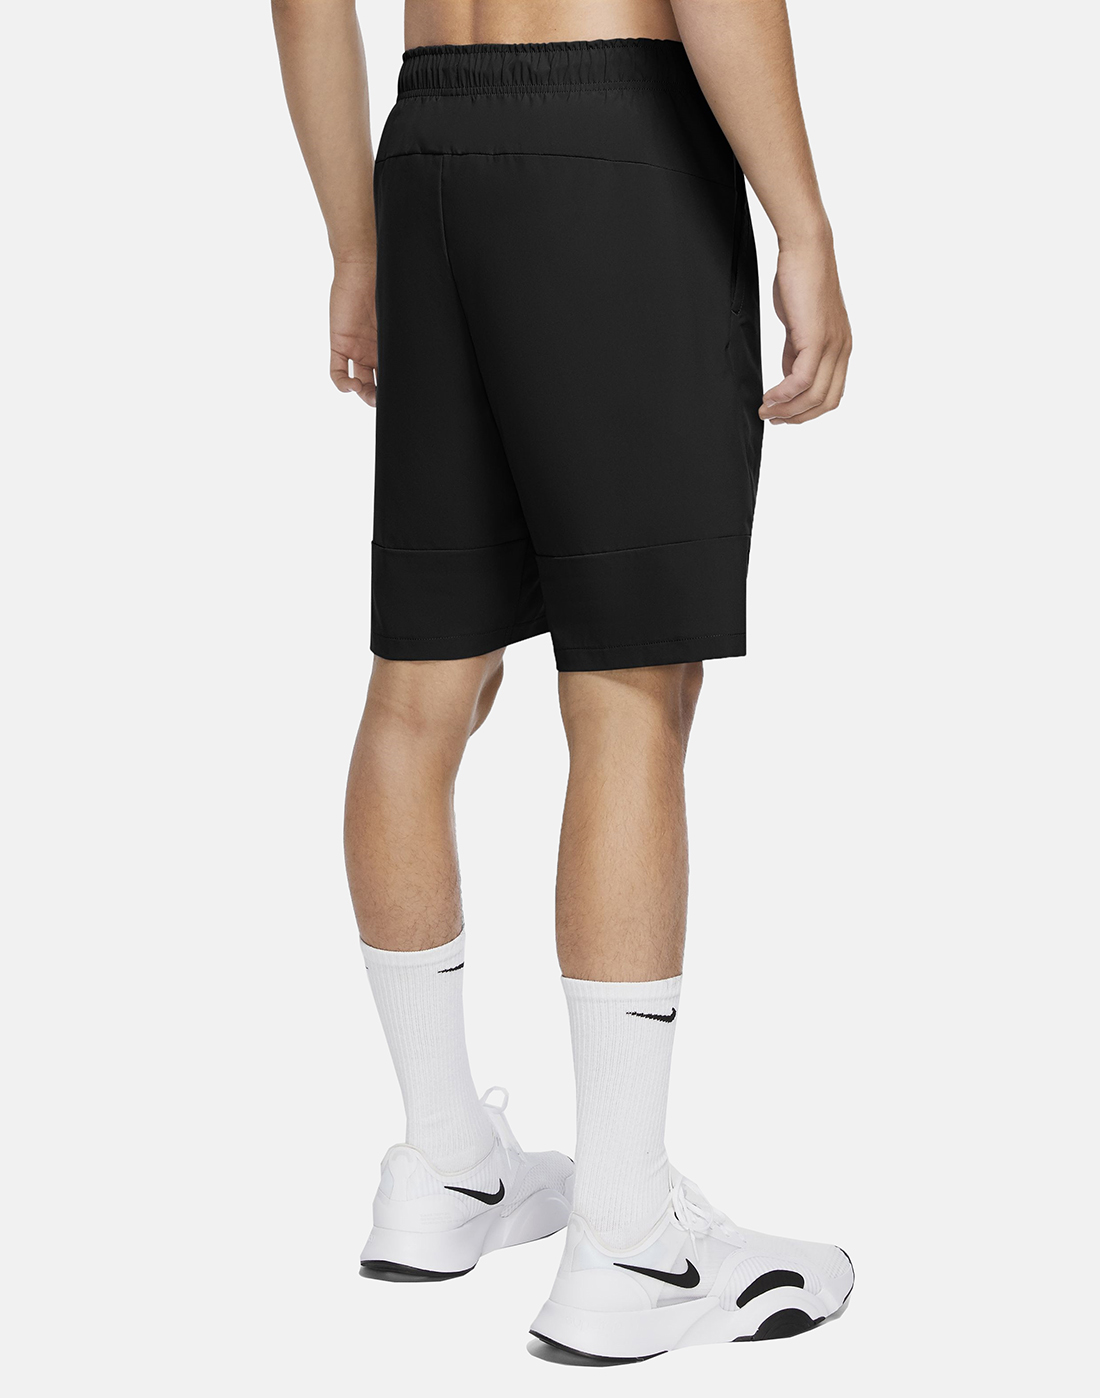 Nike Mens Dry Fit Woven Shorts - Black | Life Style Sports IE